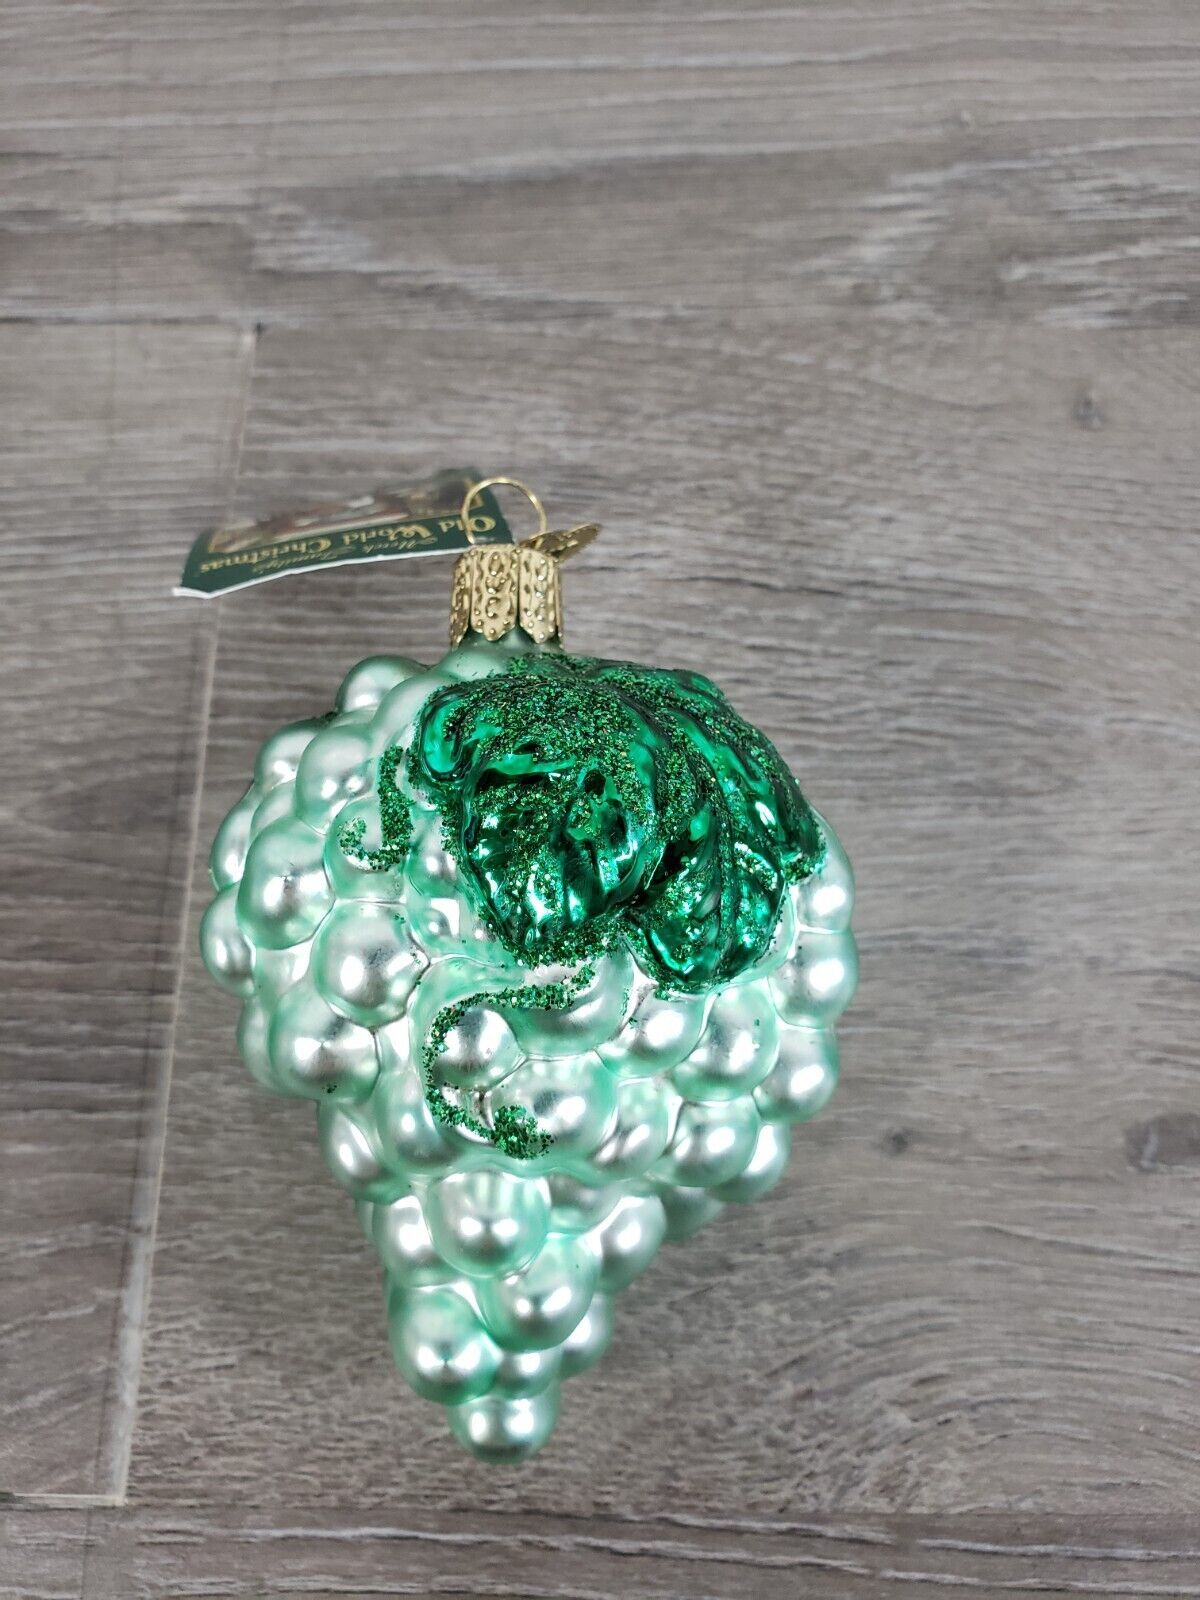 NWT Old World Christmas GLASS GRAPE Ornament  GREEN GRAPES 3.5 INCHES